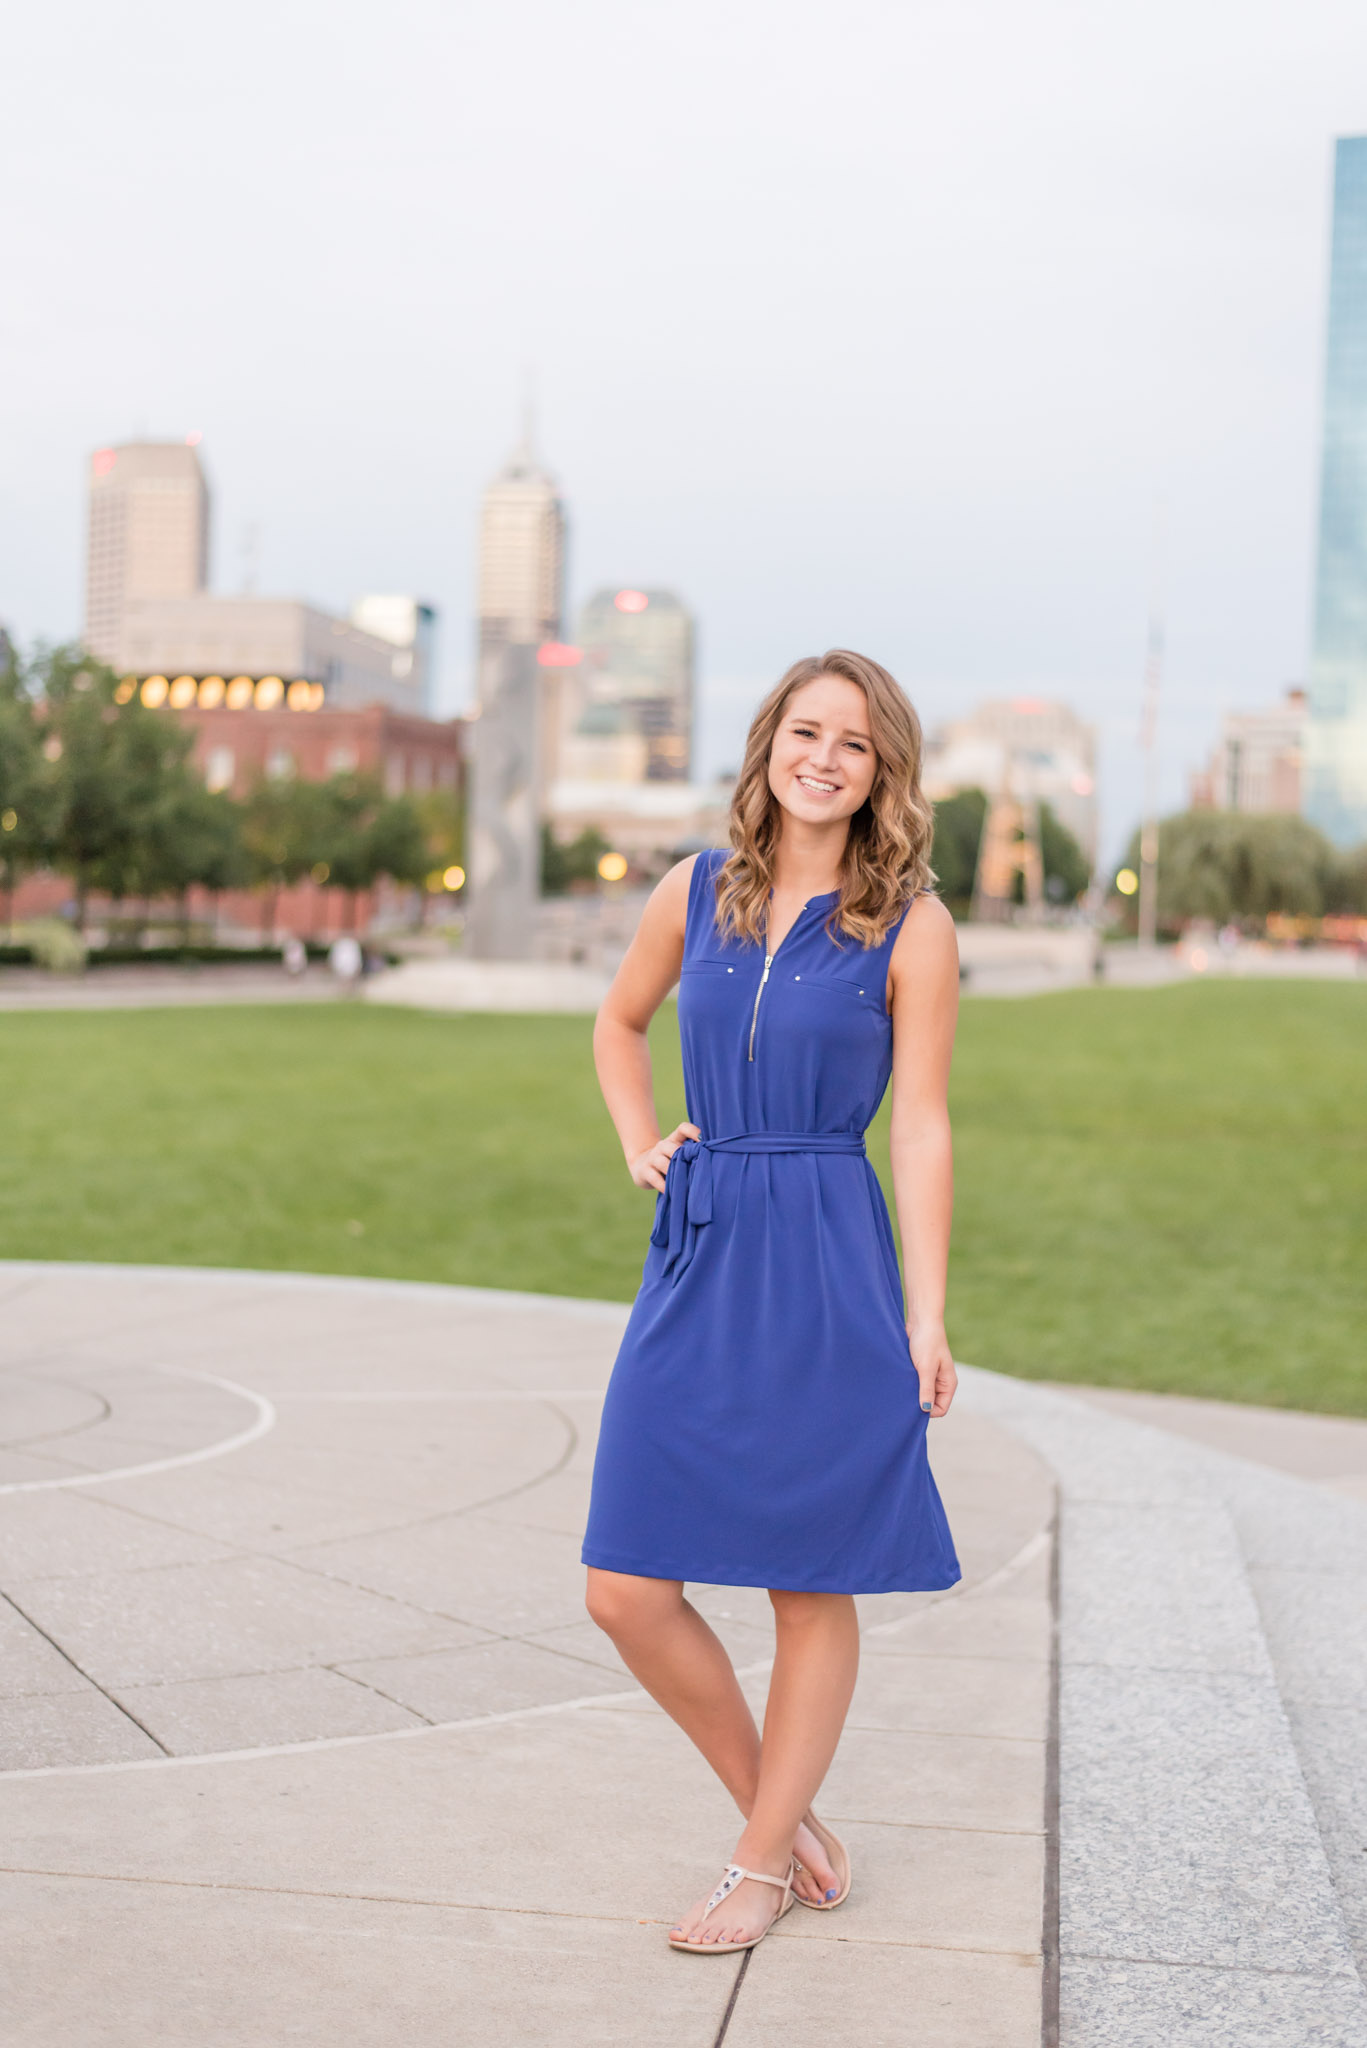 Indianapolis senior takes pictures with a city backdrop